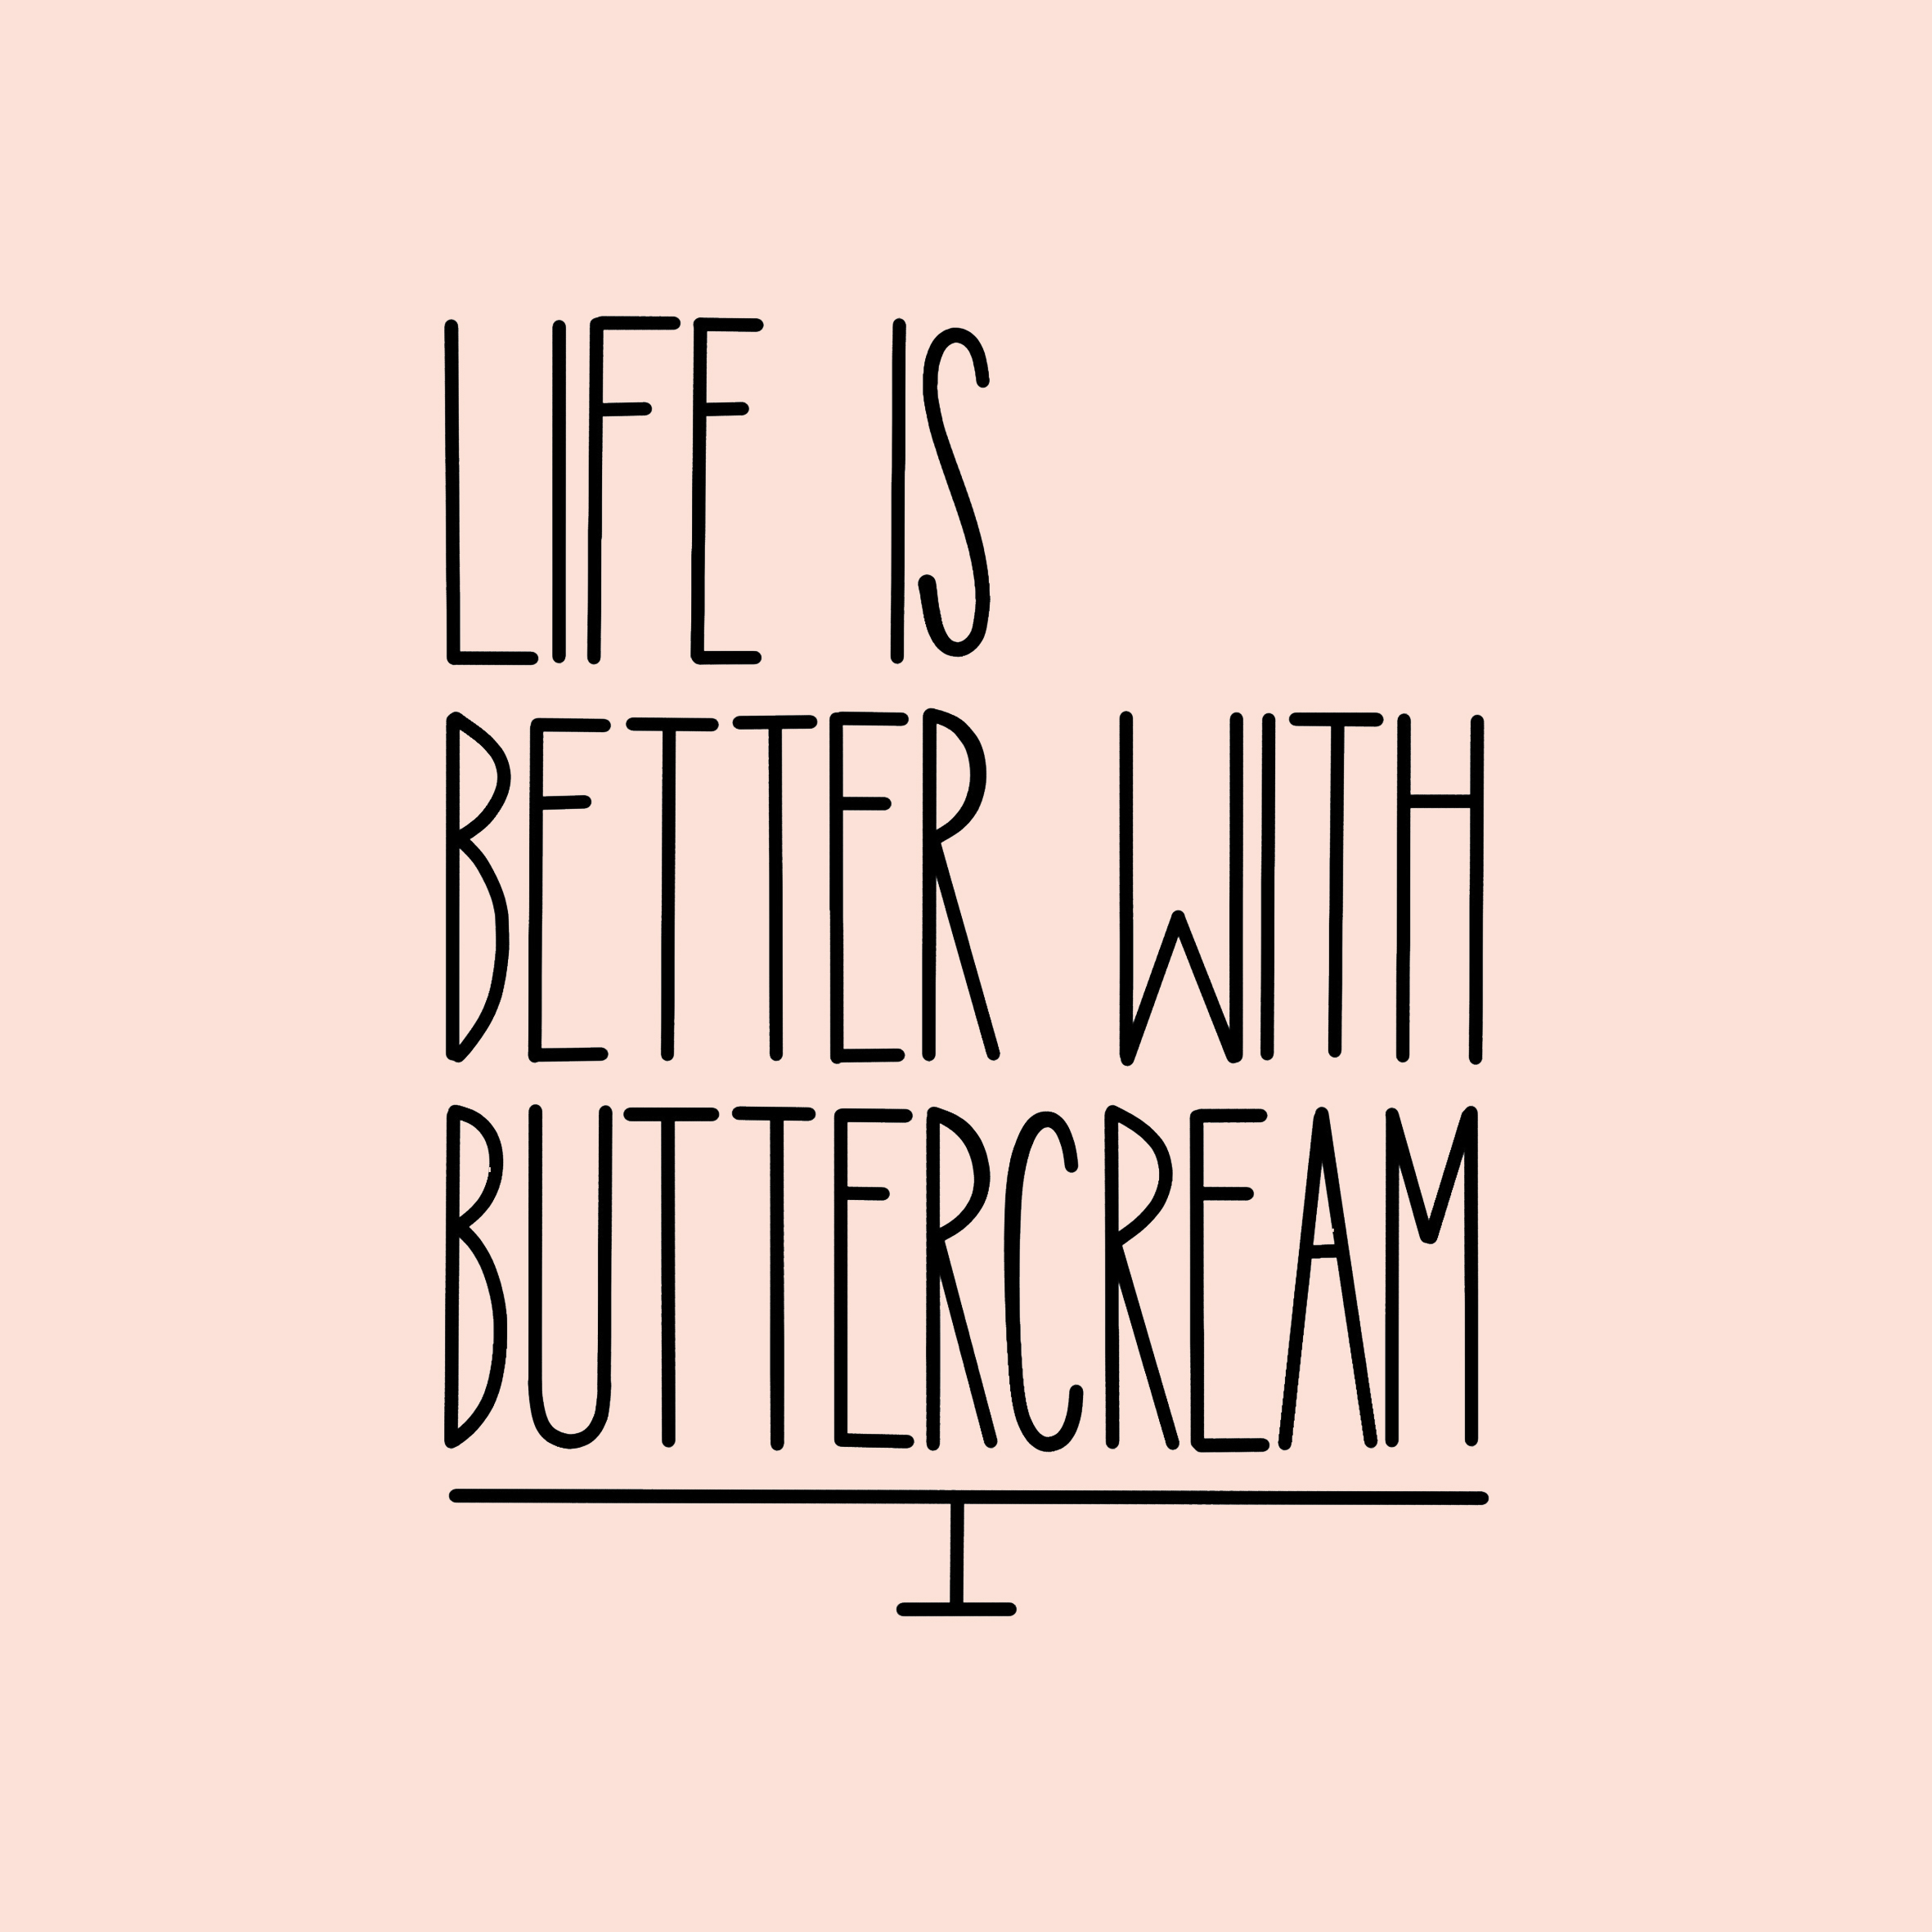  Life is better with buttercream 